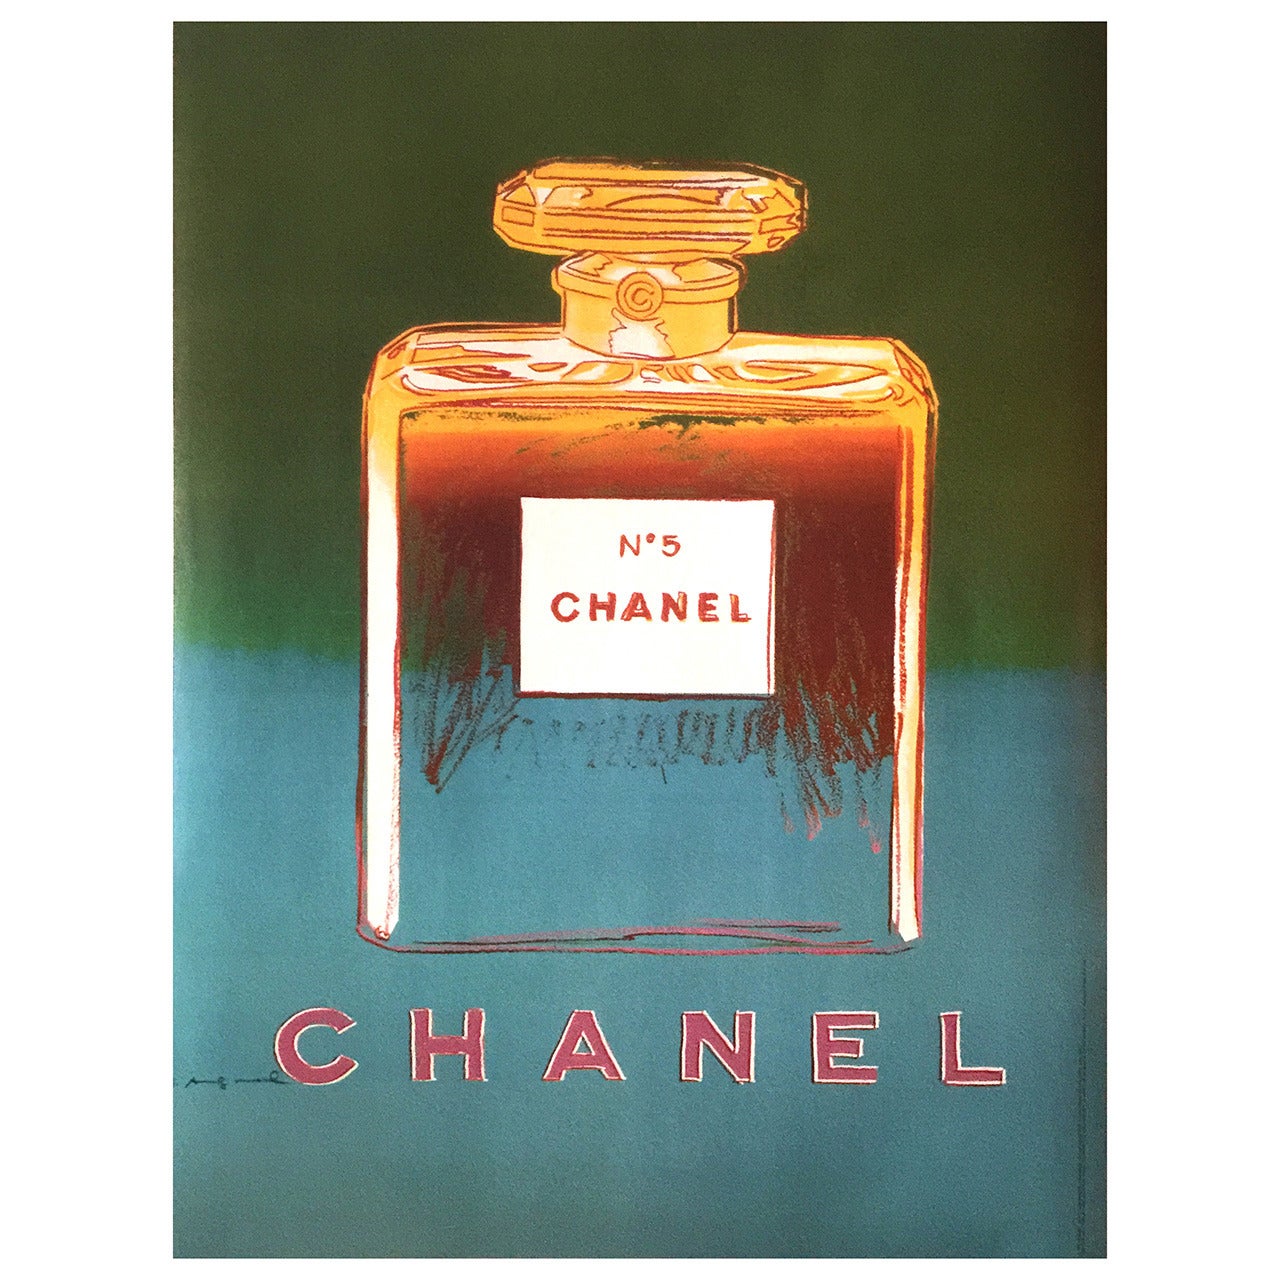 Andy Warhol for Chanel No 5, Large Size French Poster in Green and Blue